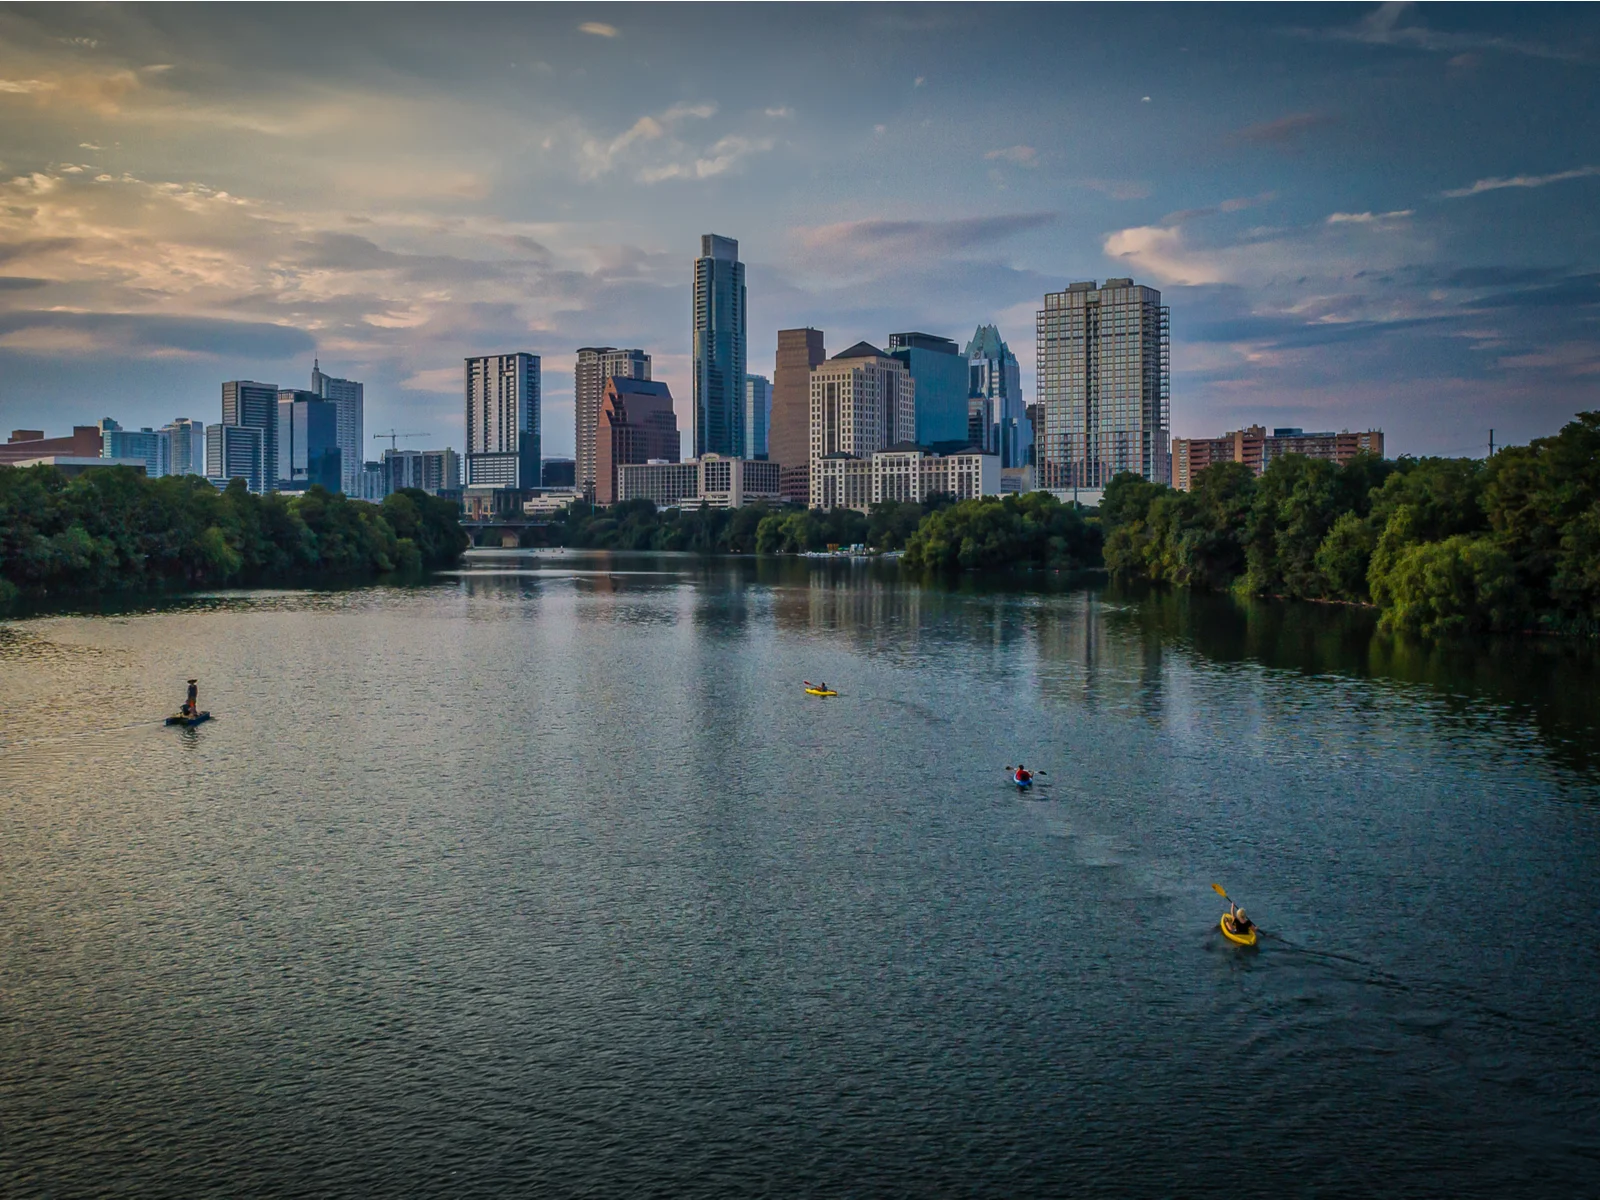 Kayakers on a lake in Austin, Texas